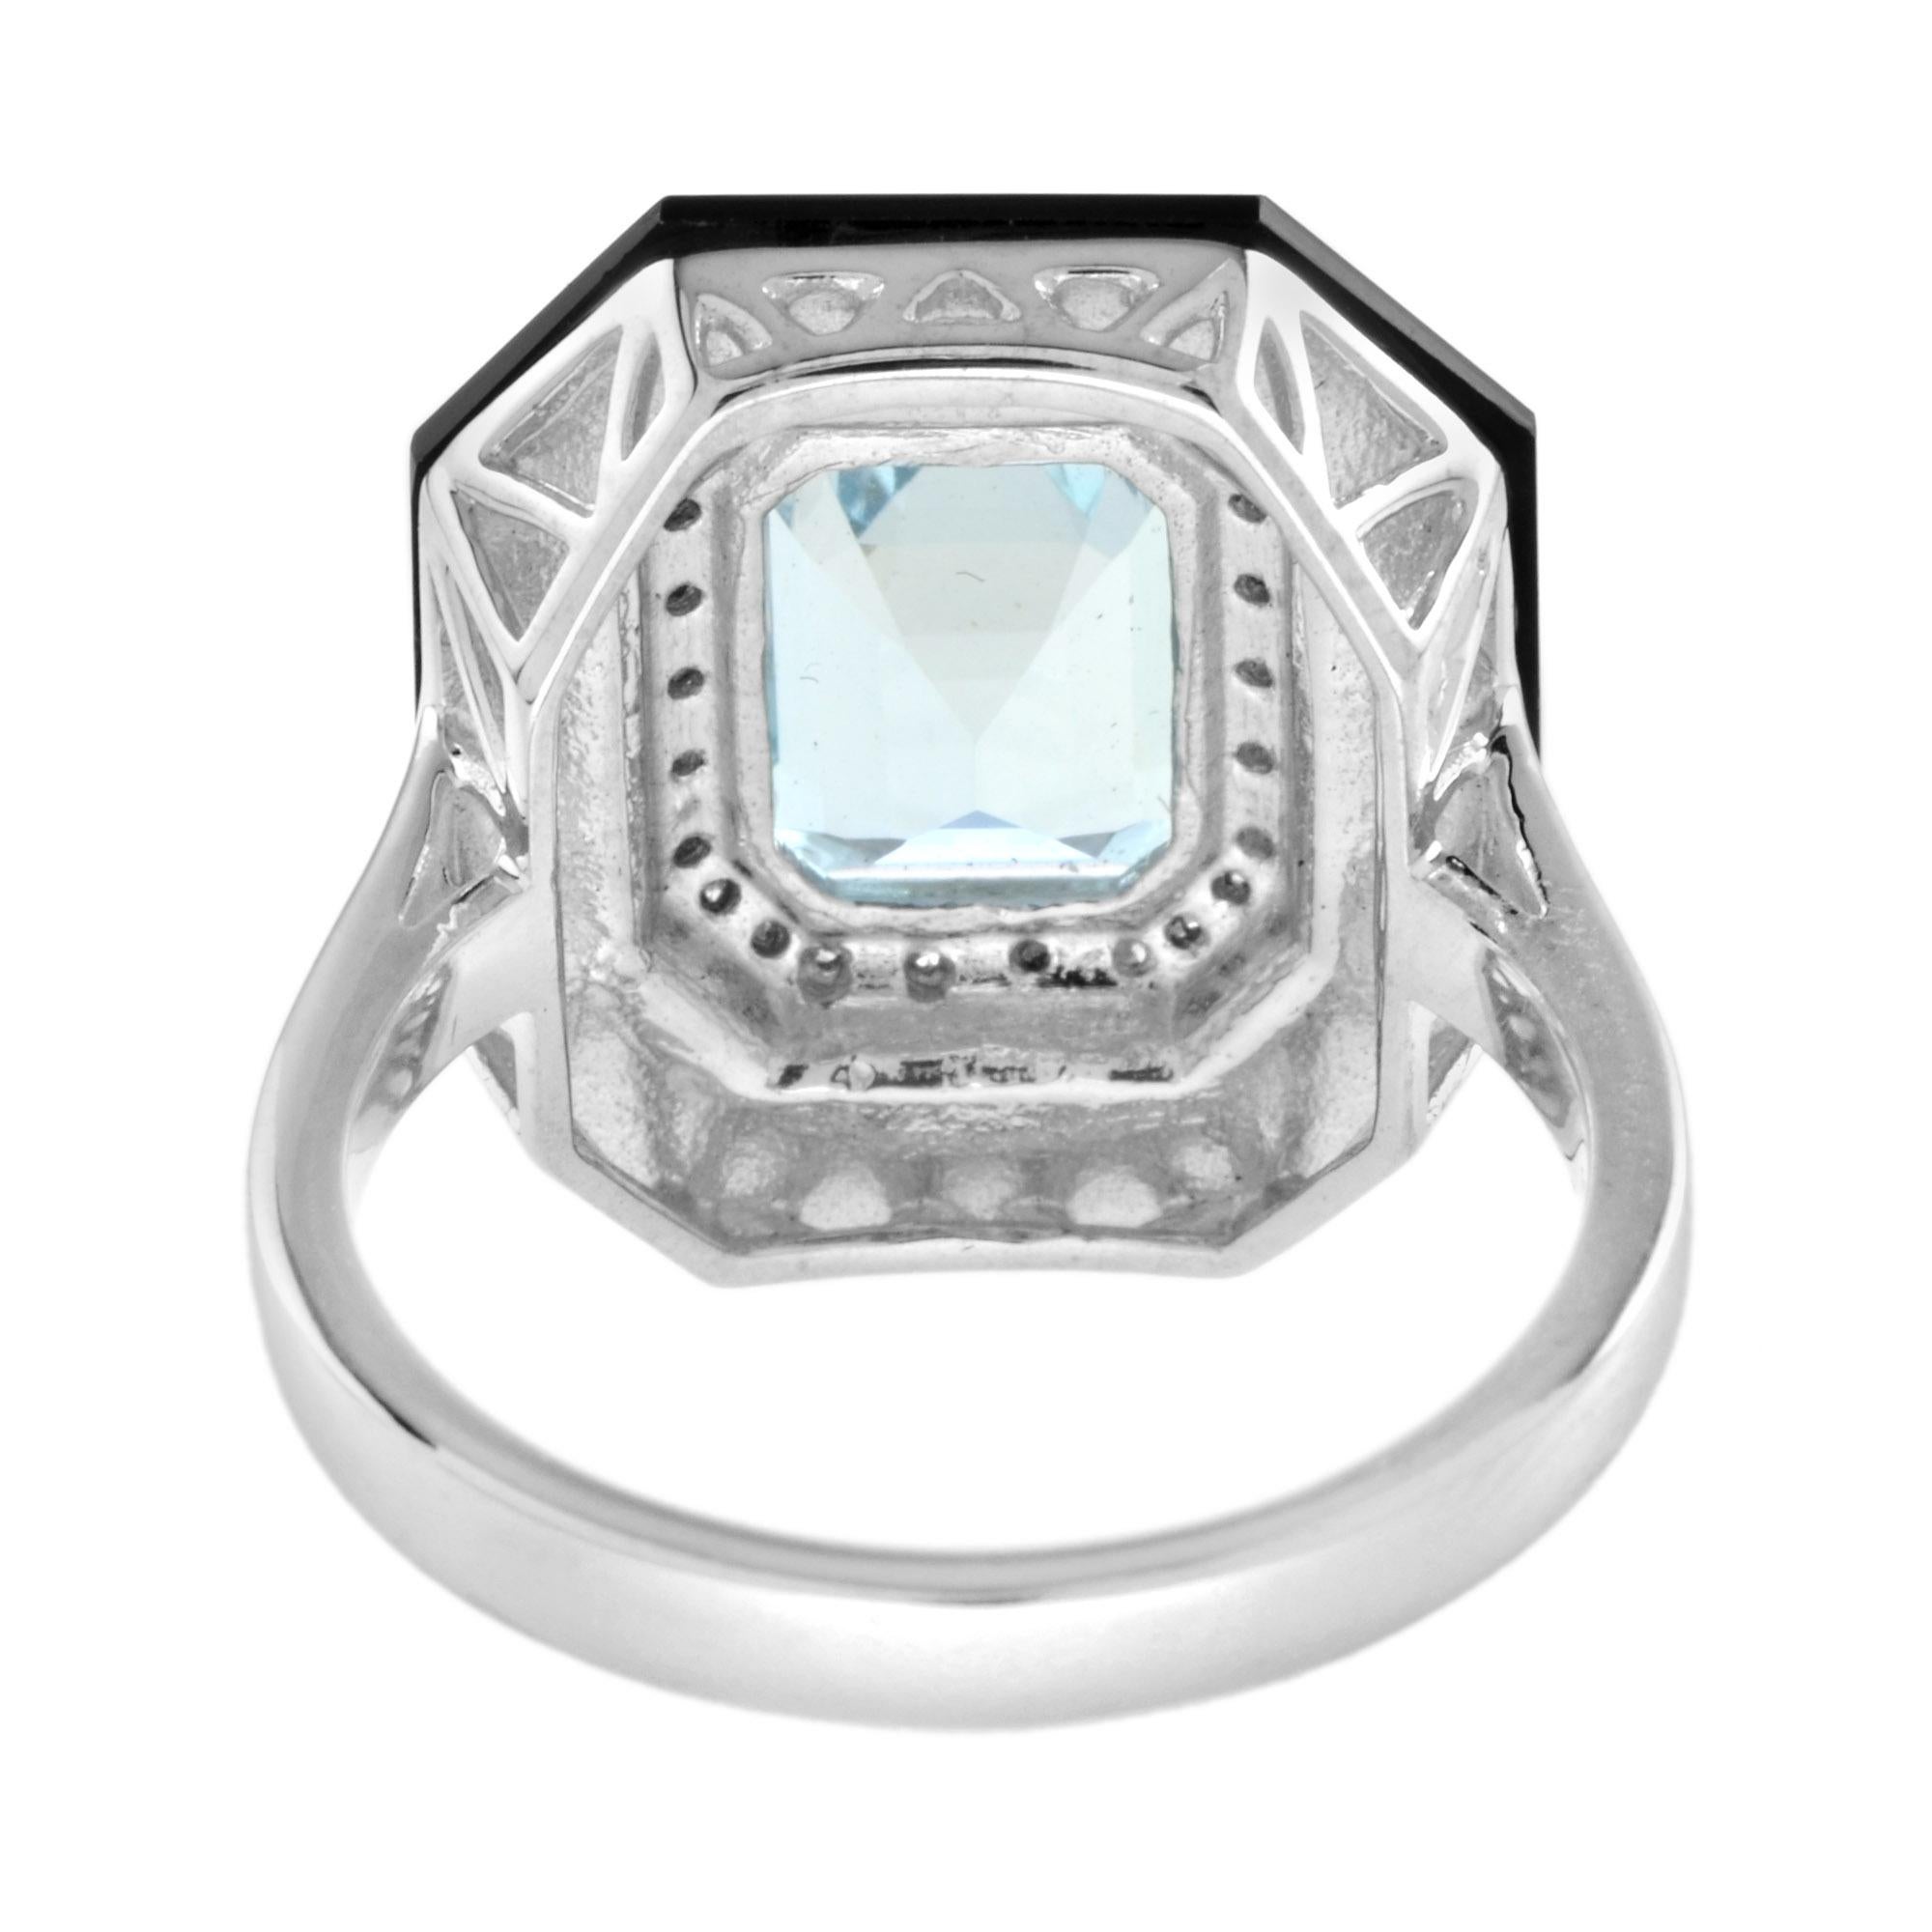 For Sale:  Cassiopeia Art Deco Style Aquamarine with Diamond and Onyx Ring in 18K Gold 4